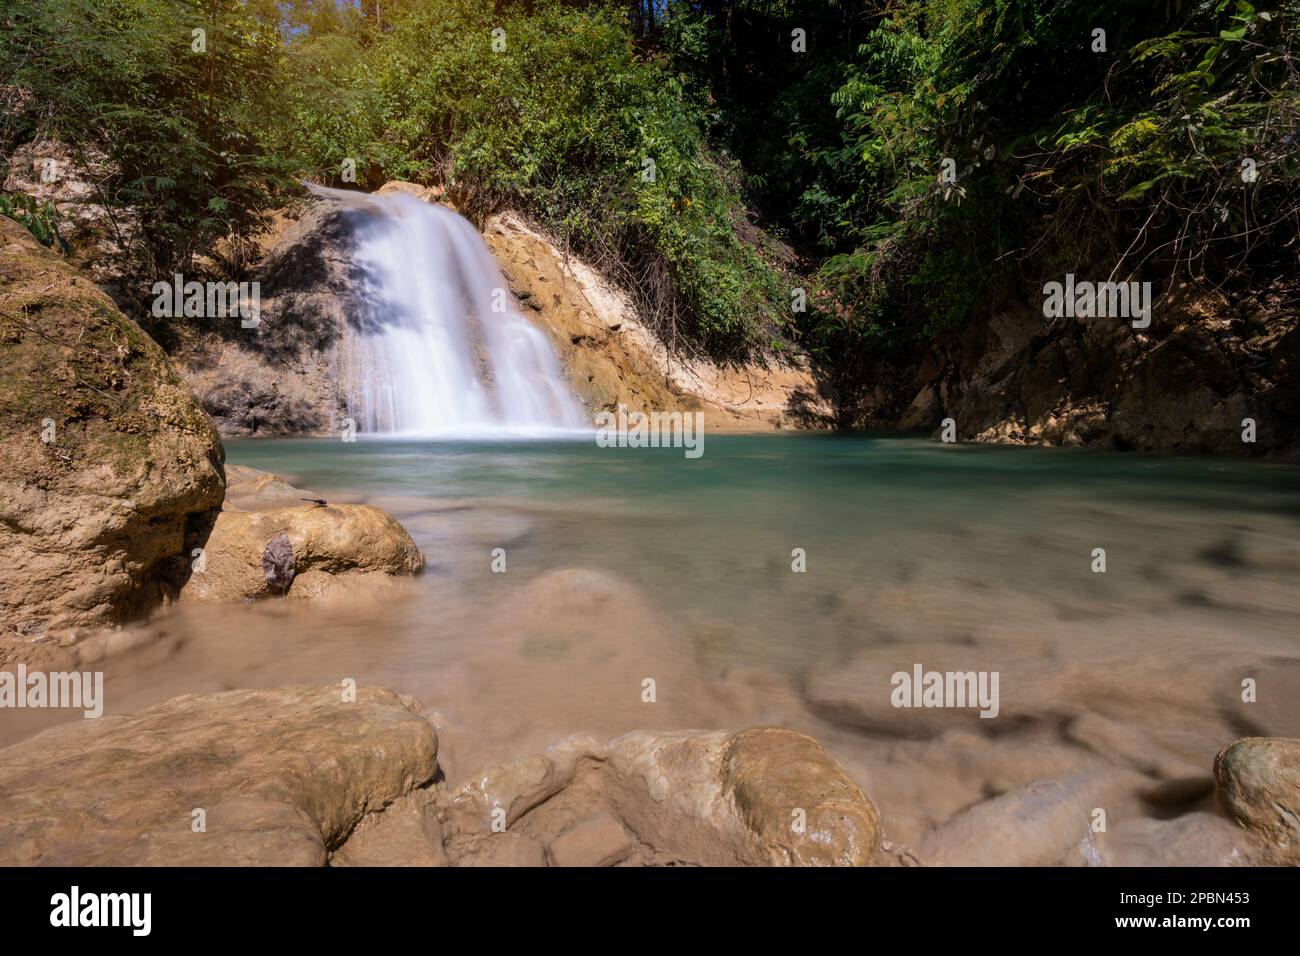 Scenic view of a cool refreshing waterfall. Stock Photo